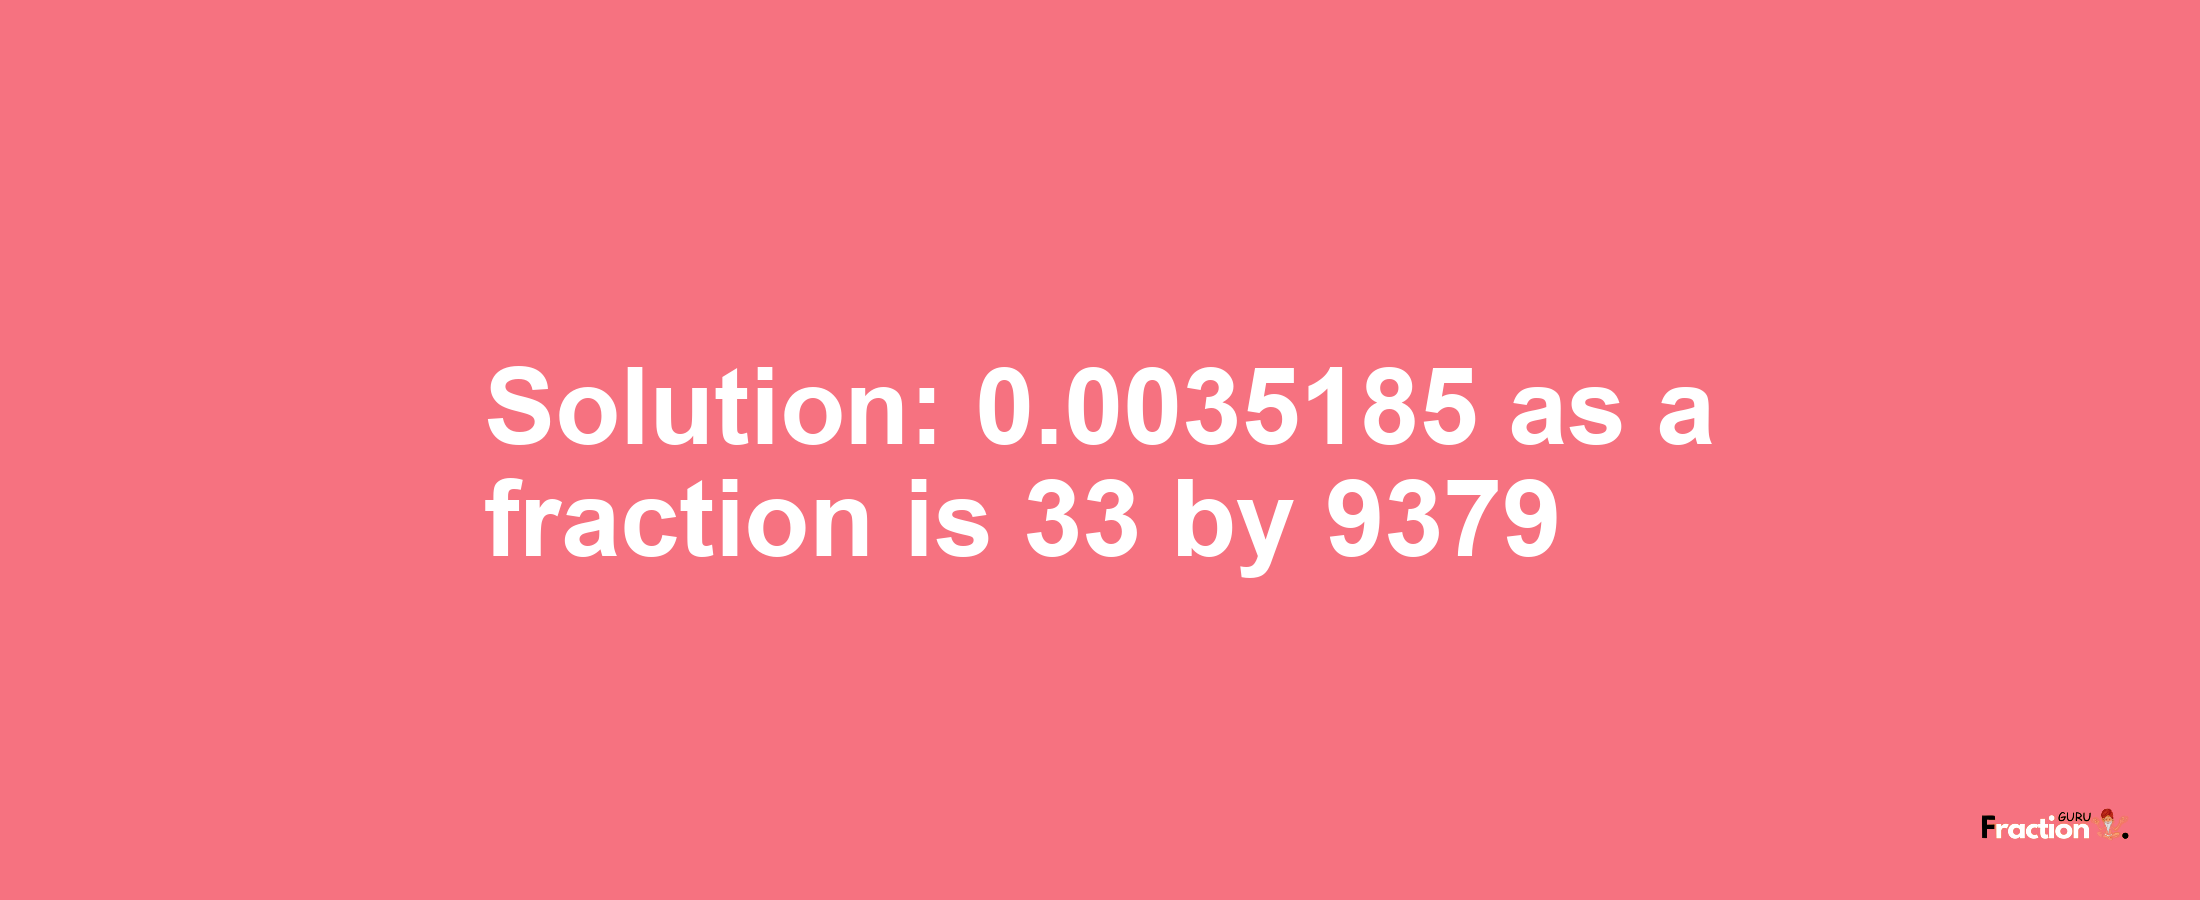 Solution:0.0035185 as a fraction is 33/9379